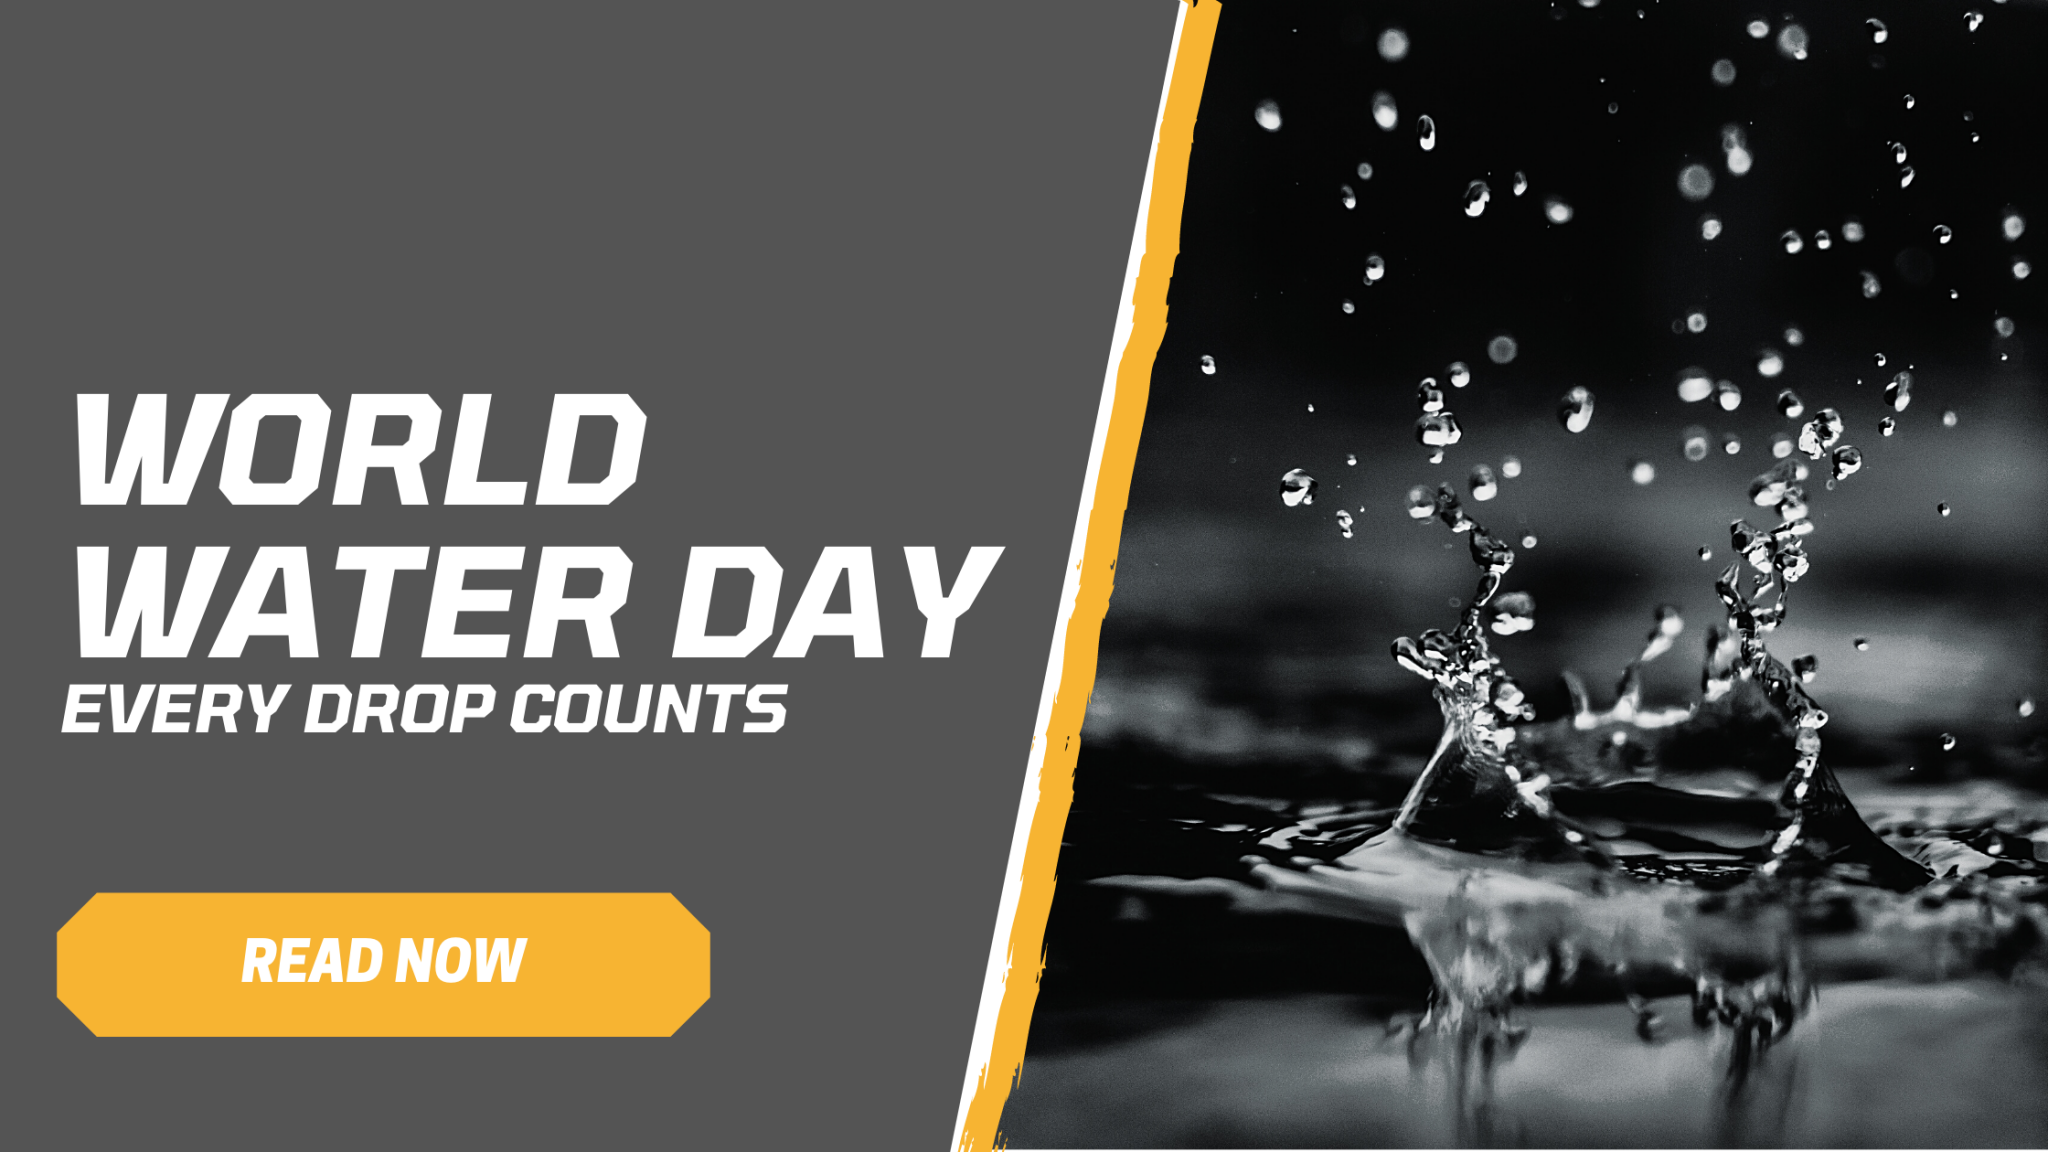 Every drop counts this World Water Day